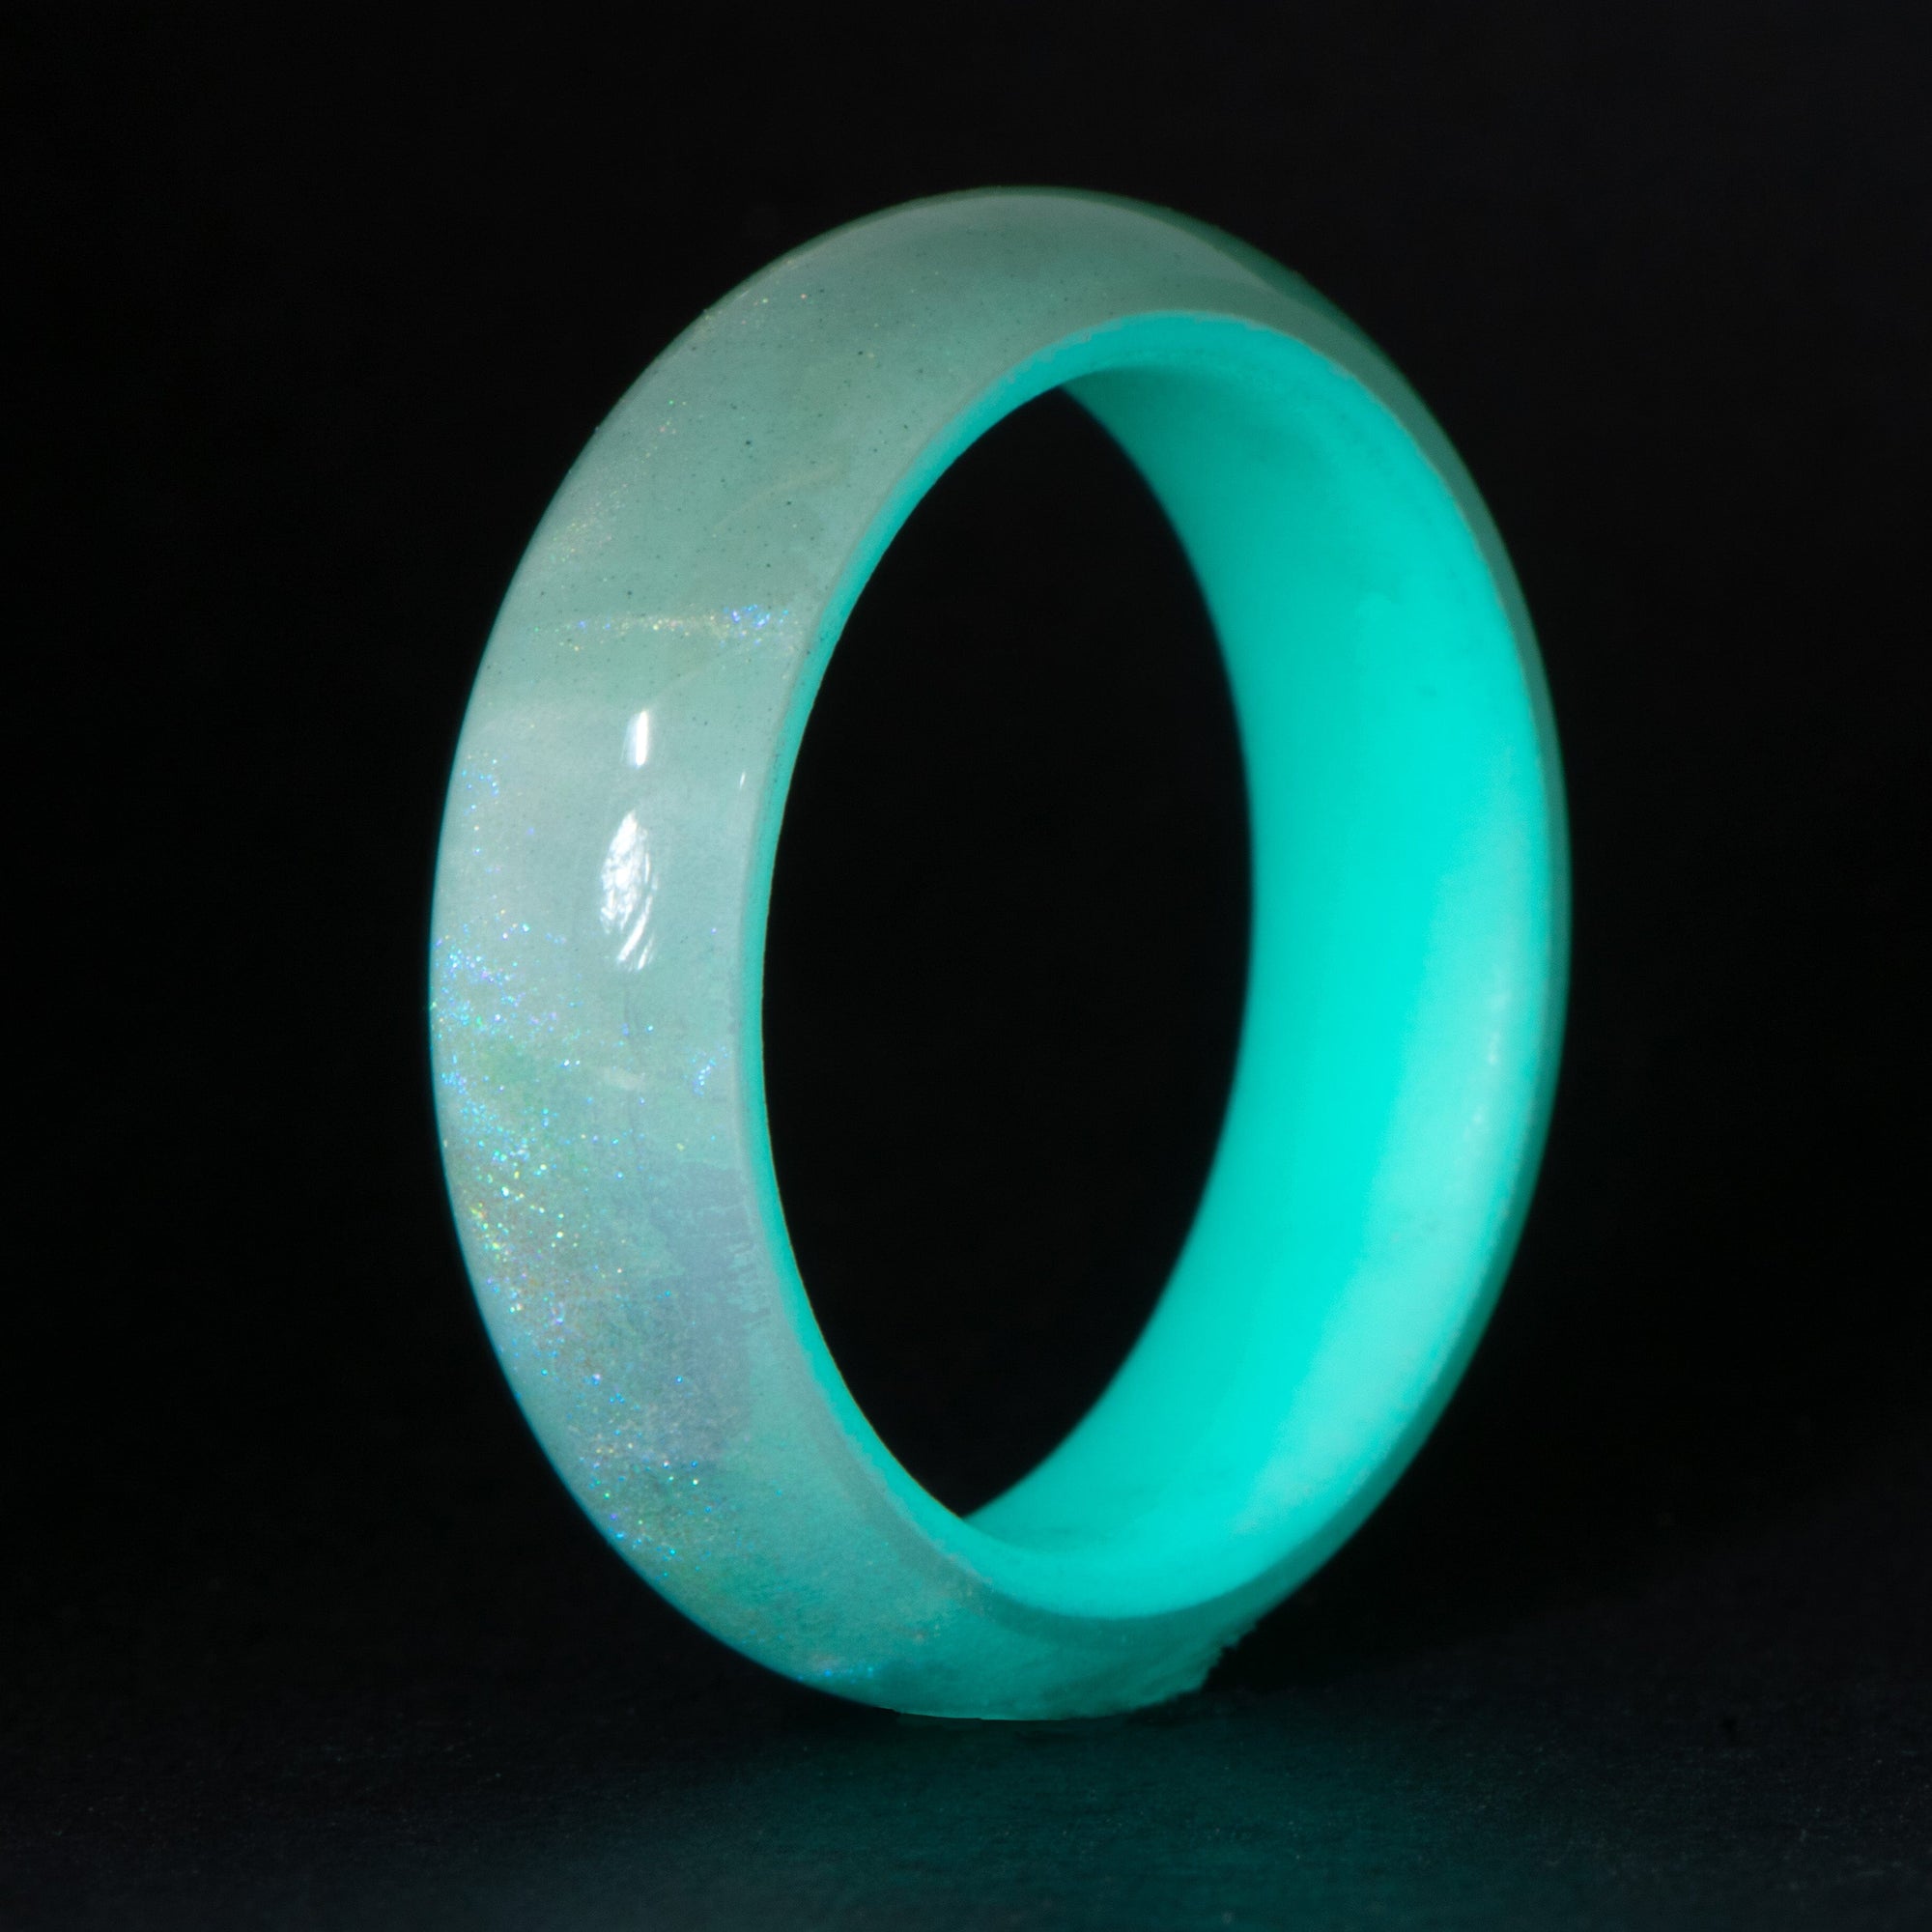 Turquoise glow ring with iridescent polymer exterior on a black background.  